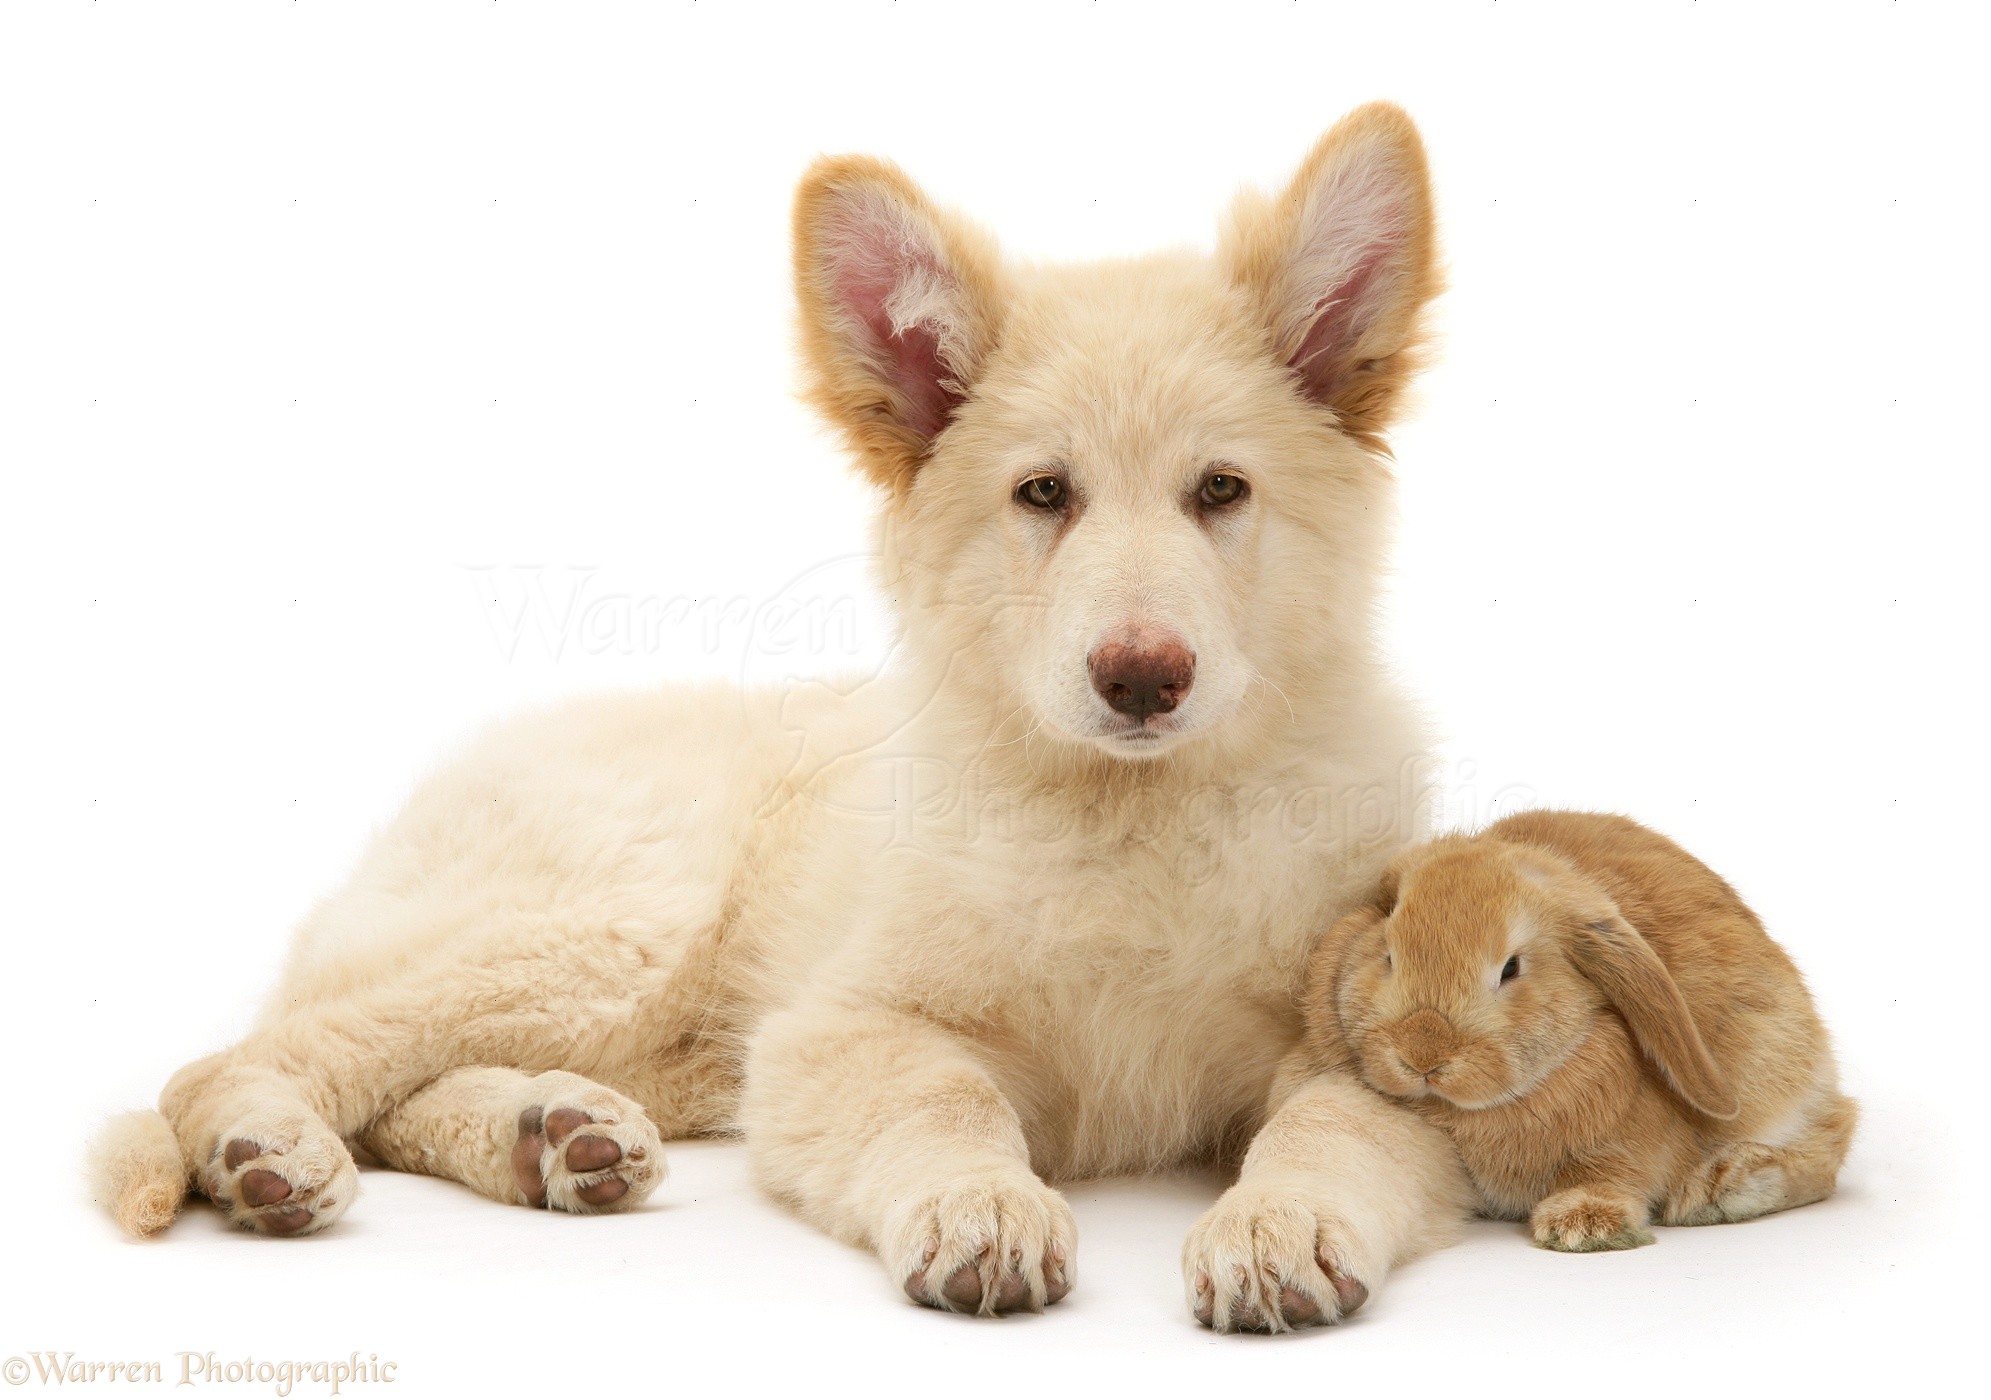 WP22023 White German Shepherd Dog pup and Sandy Lop baby rabbit. - 22023-White-Alsatian-and-rabbit-white-background